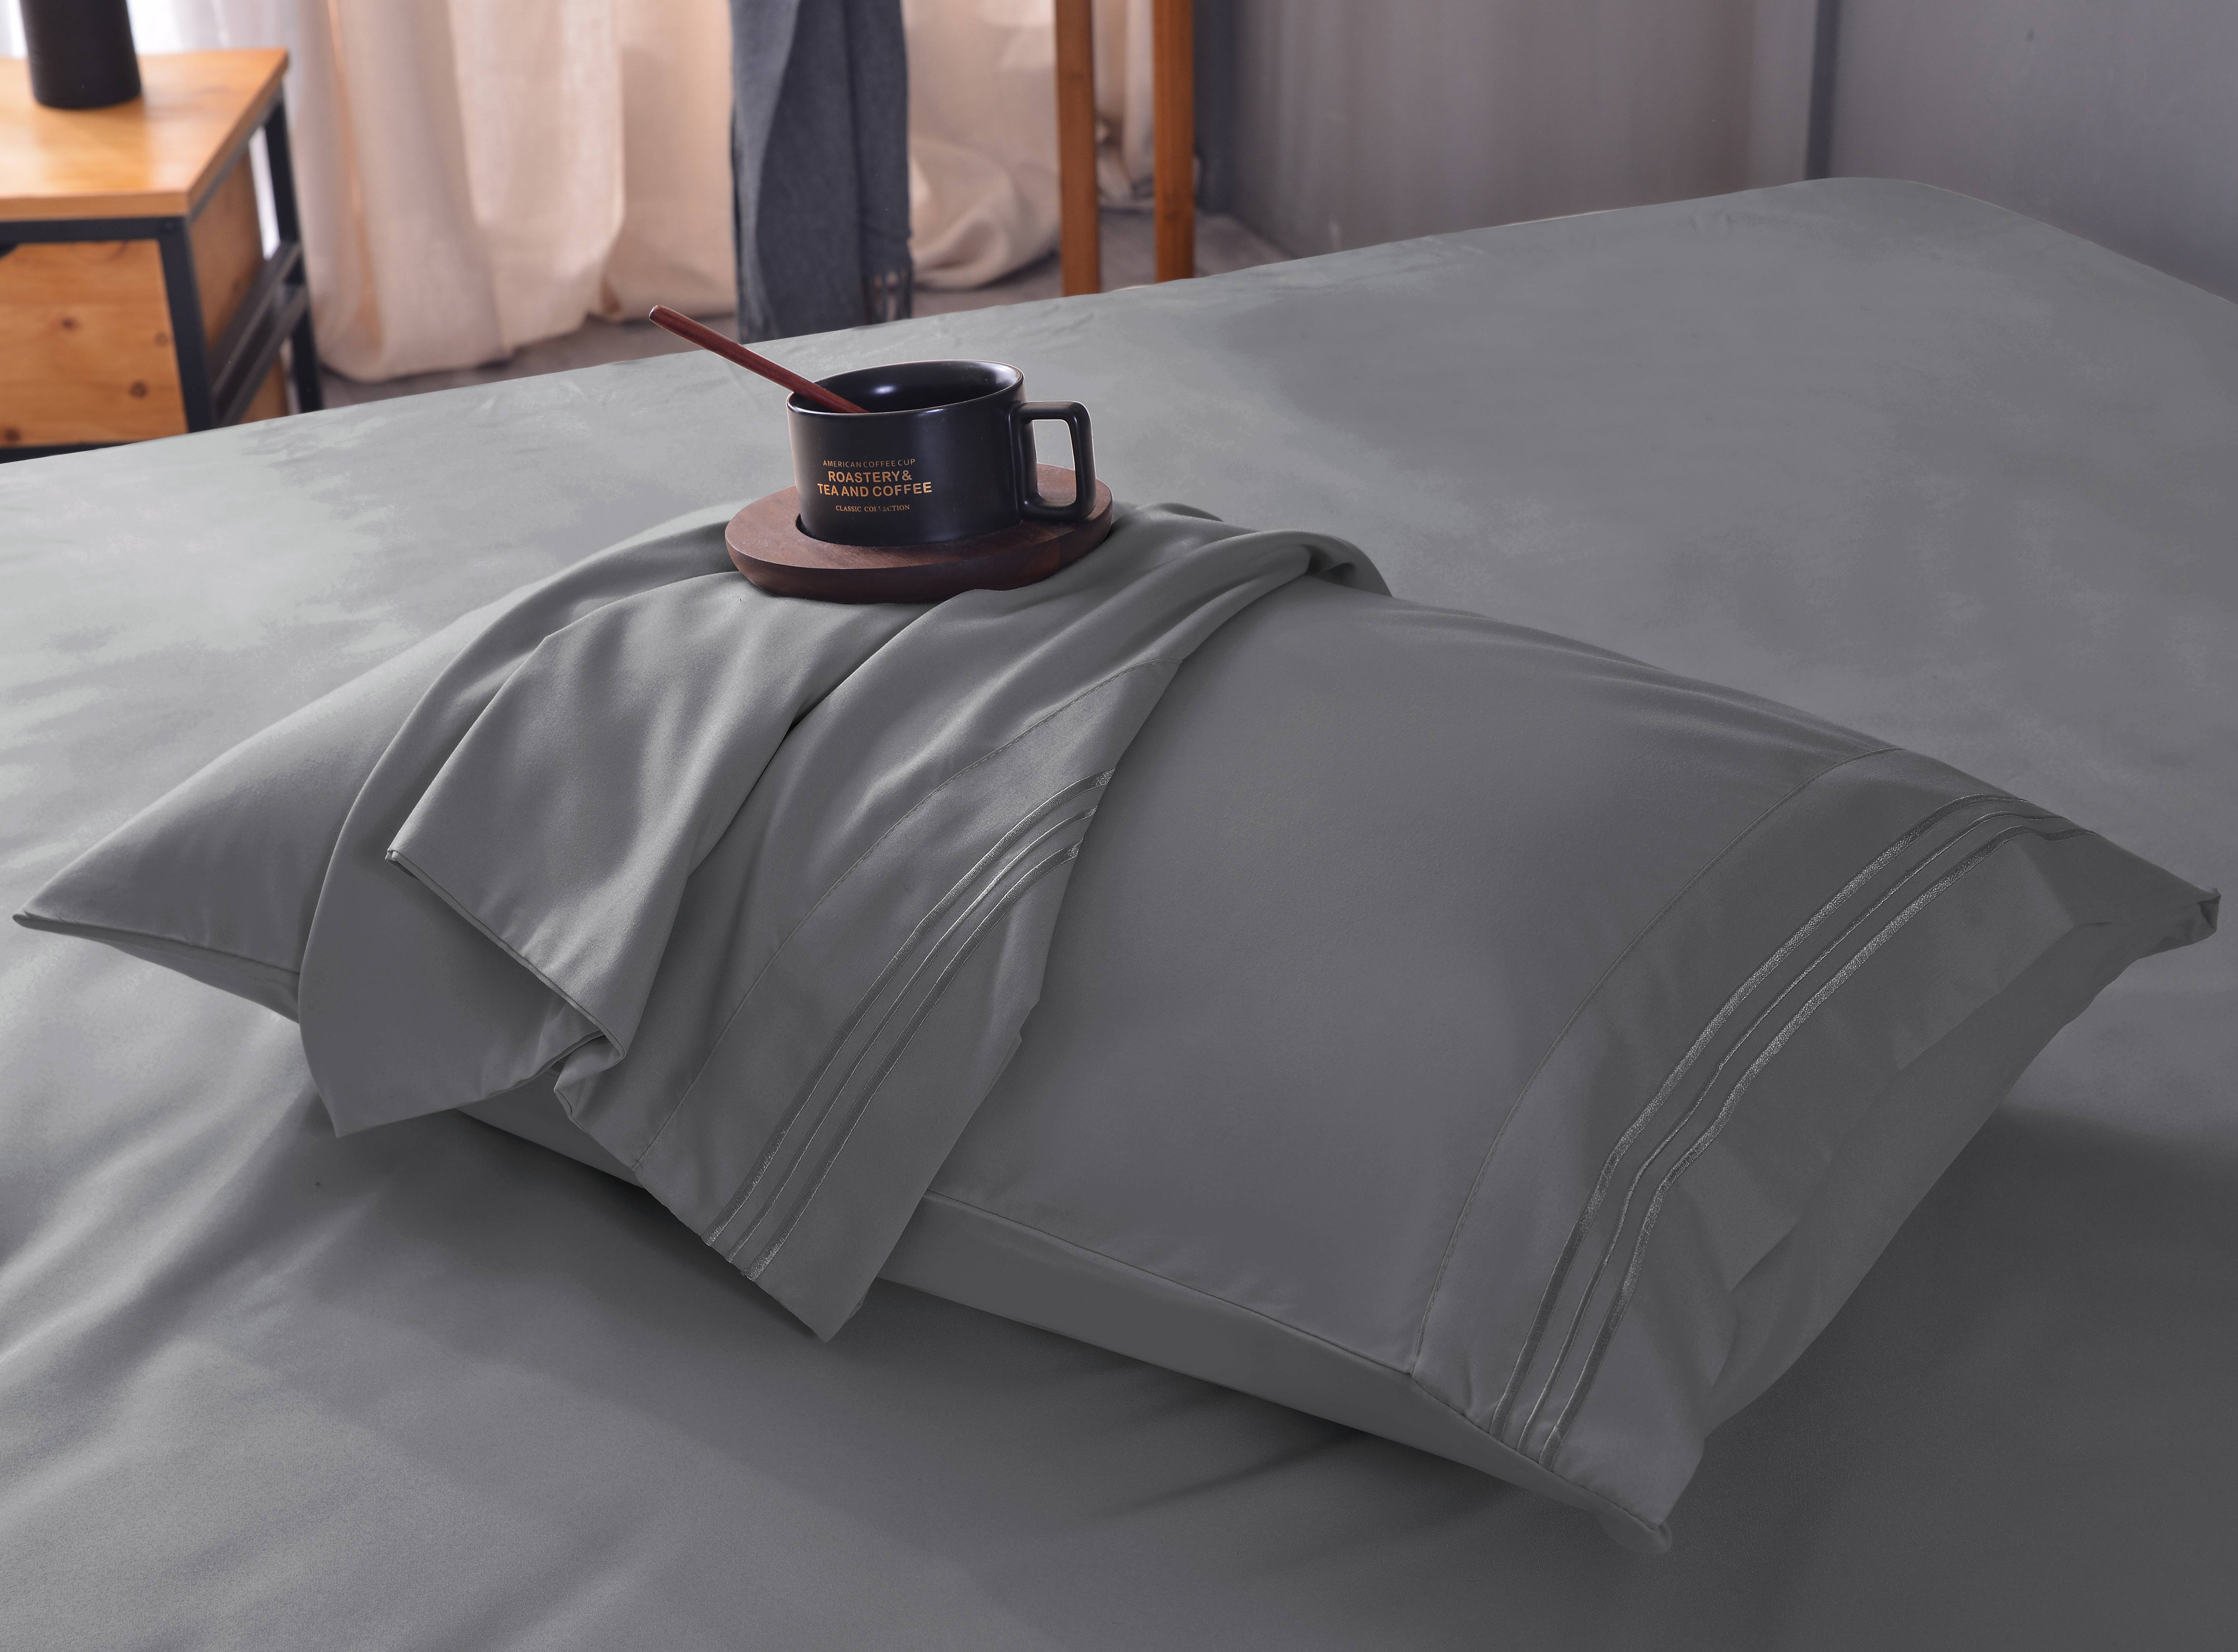 Mutlu Home Goods Rayon Made From Bamboo Sheets Set, Queen Gray Sheets -Deep Pockets-Available in Queen,King,Full,California King,Twin,Twin XL-Wrinkle Free-Ultrasoft-4 Pieces, Queen Size, Gray - image 4 of 5